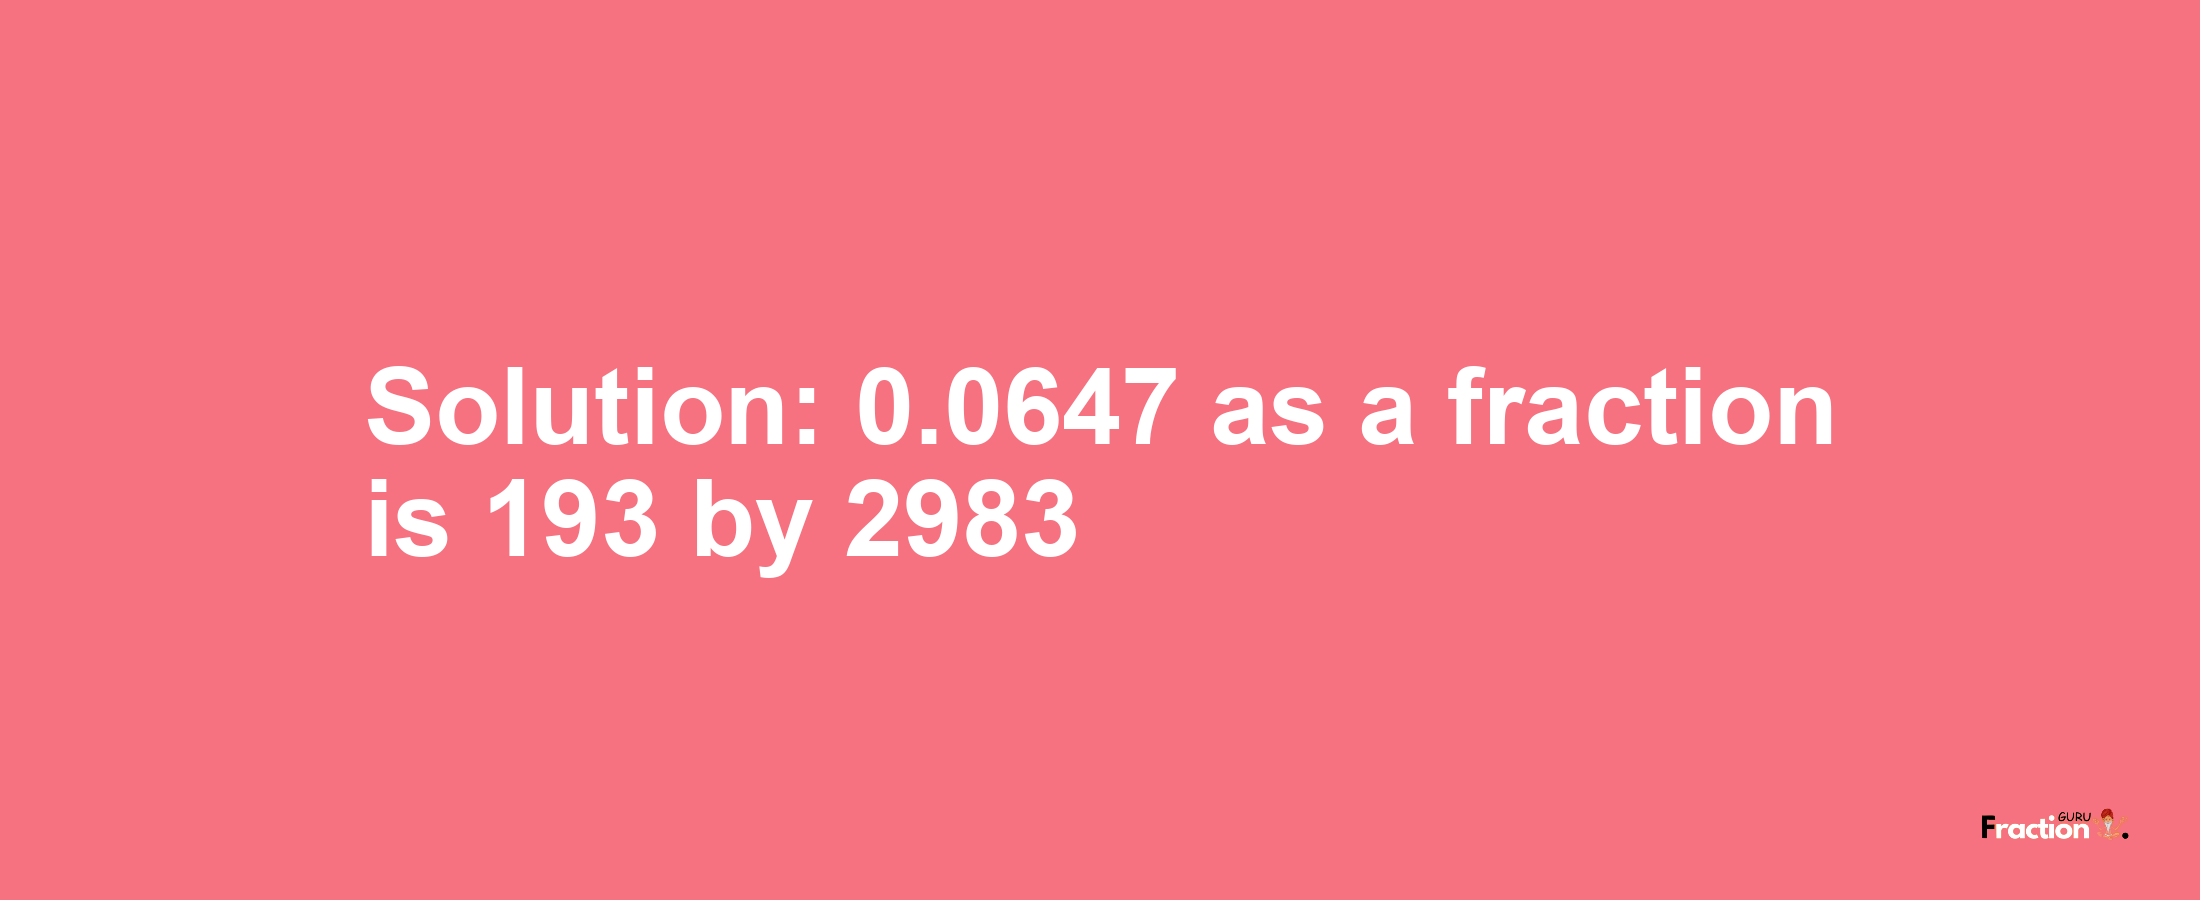 Solution:0.0647 as a fraction is 193/2983